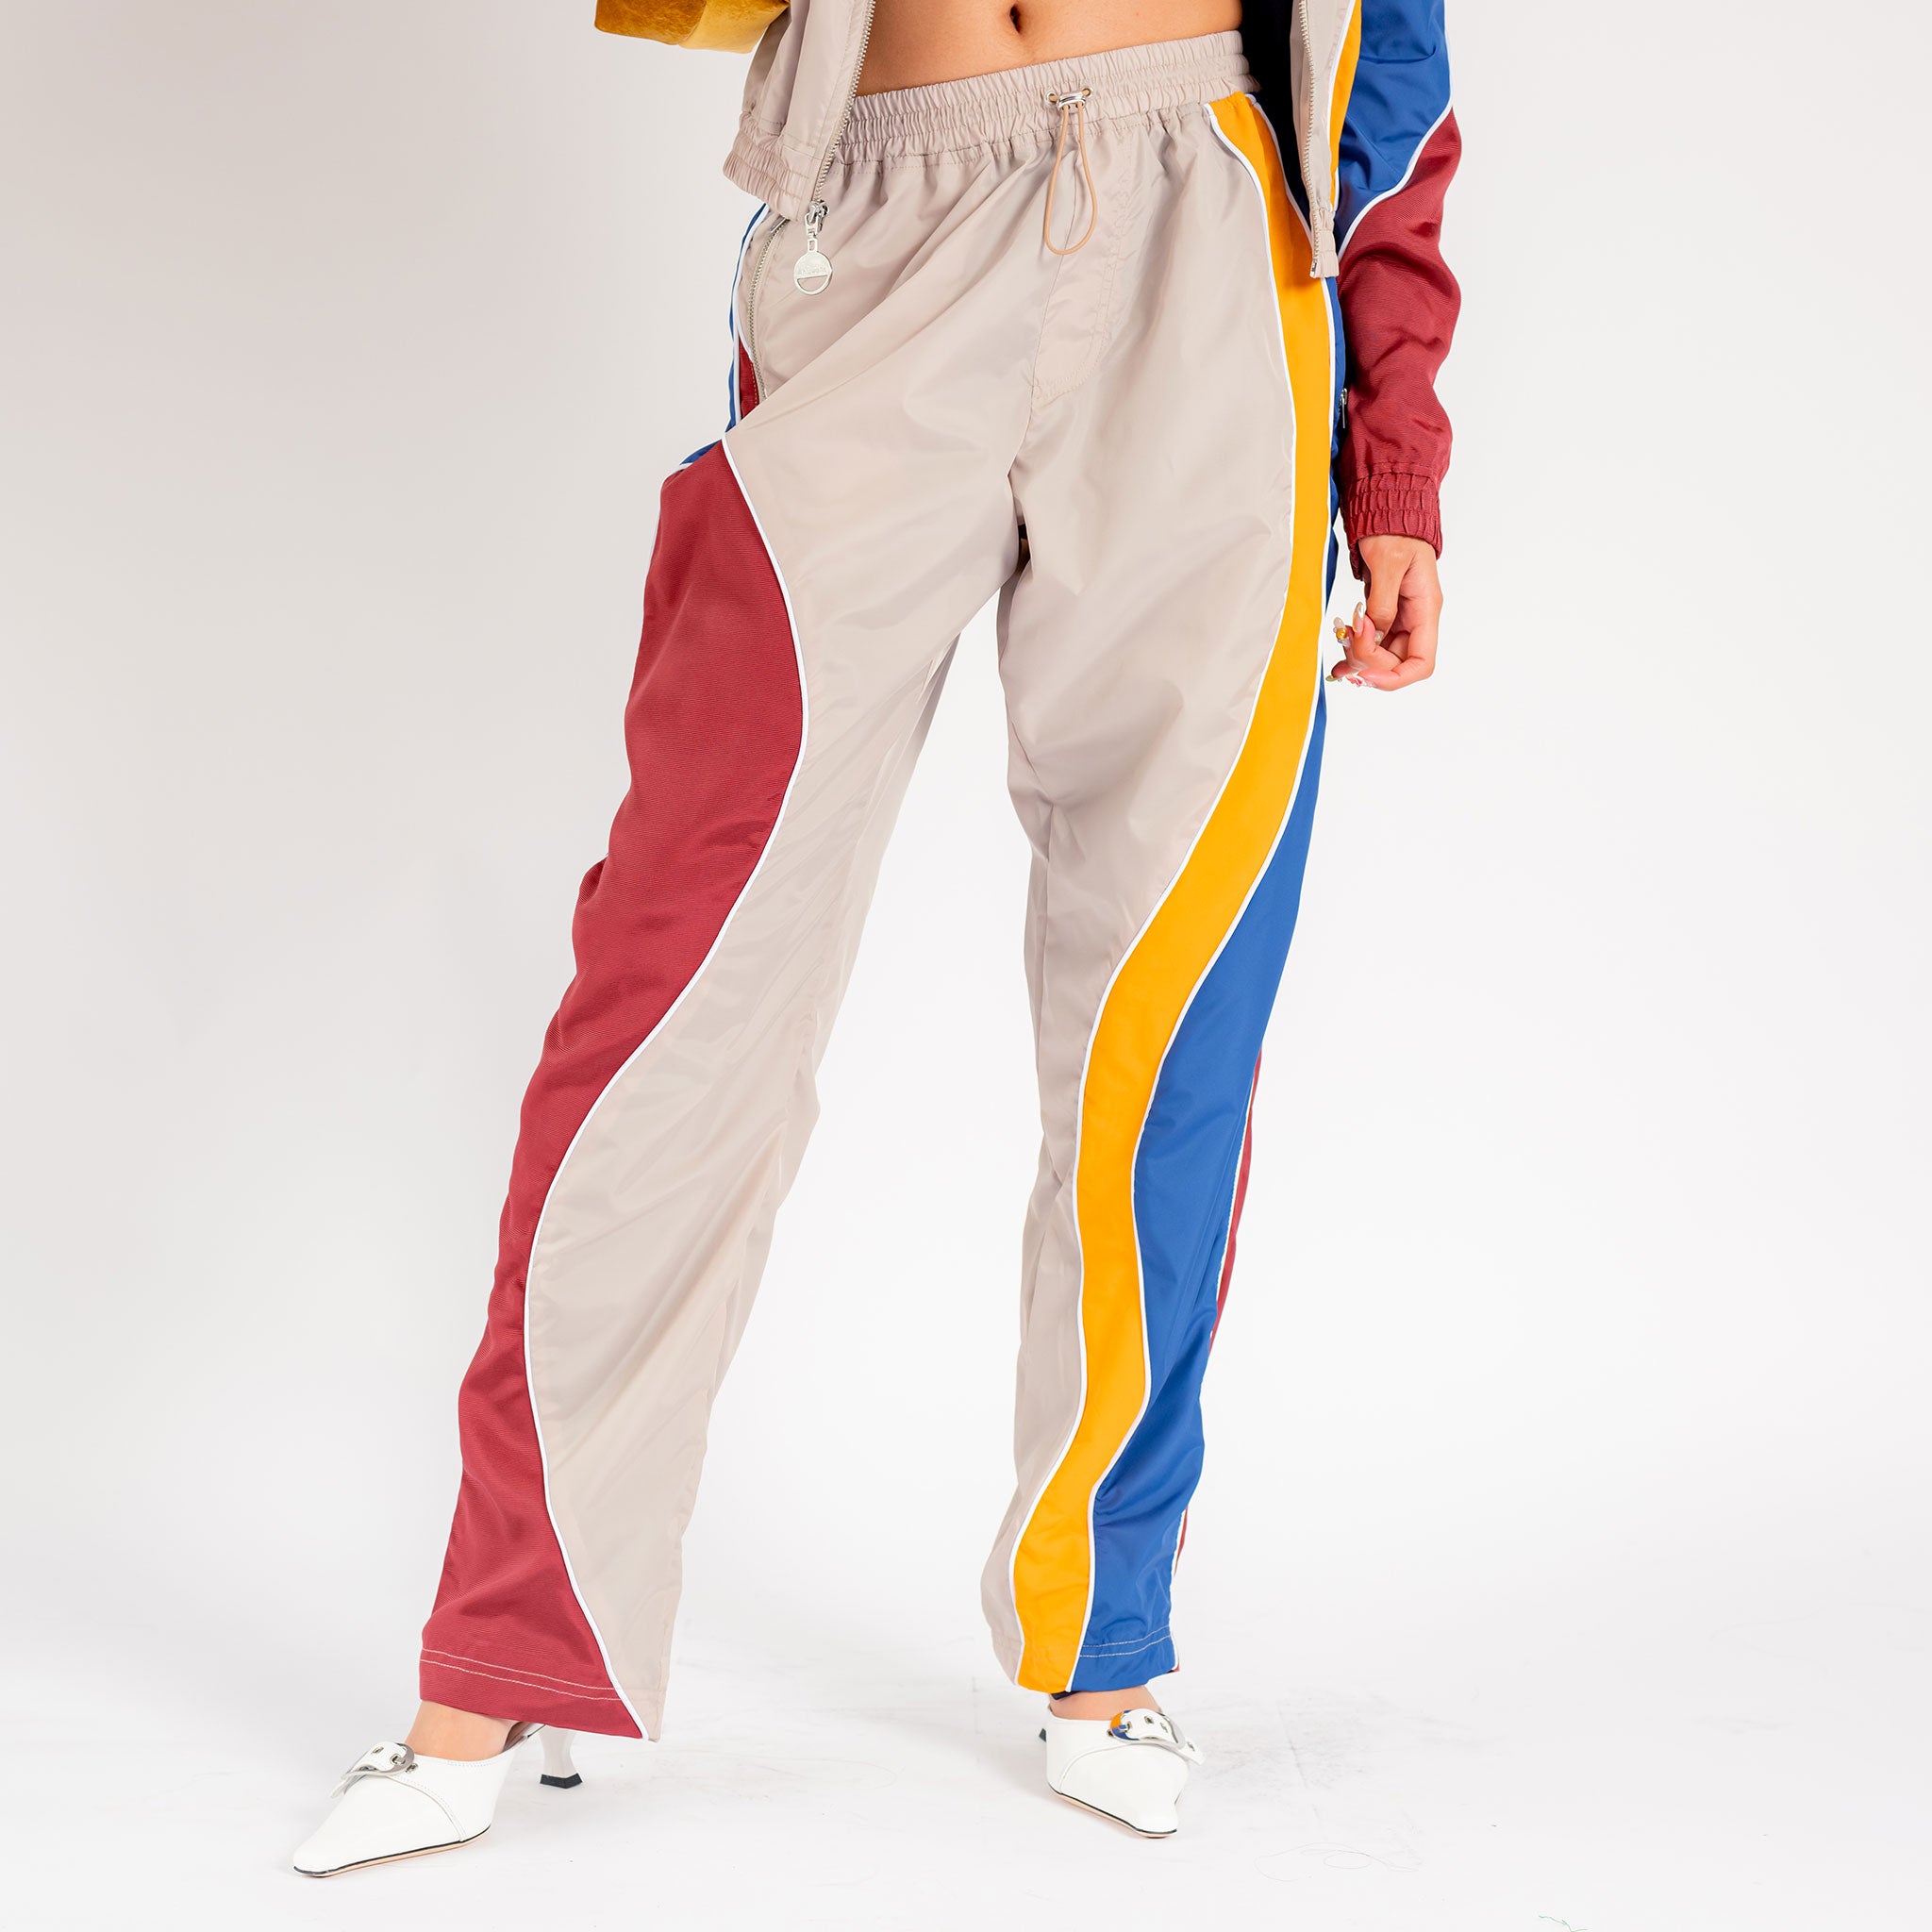 Los Angeles Apparel, Pants & Jumpsuits, Los Angeles Apparel Nylon Track  Pant Open To Offers